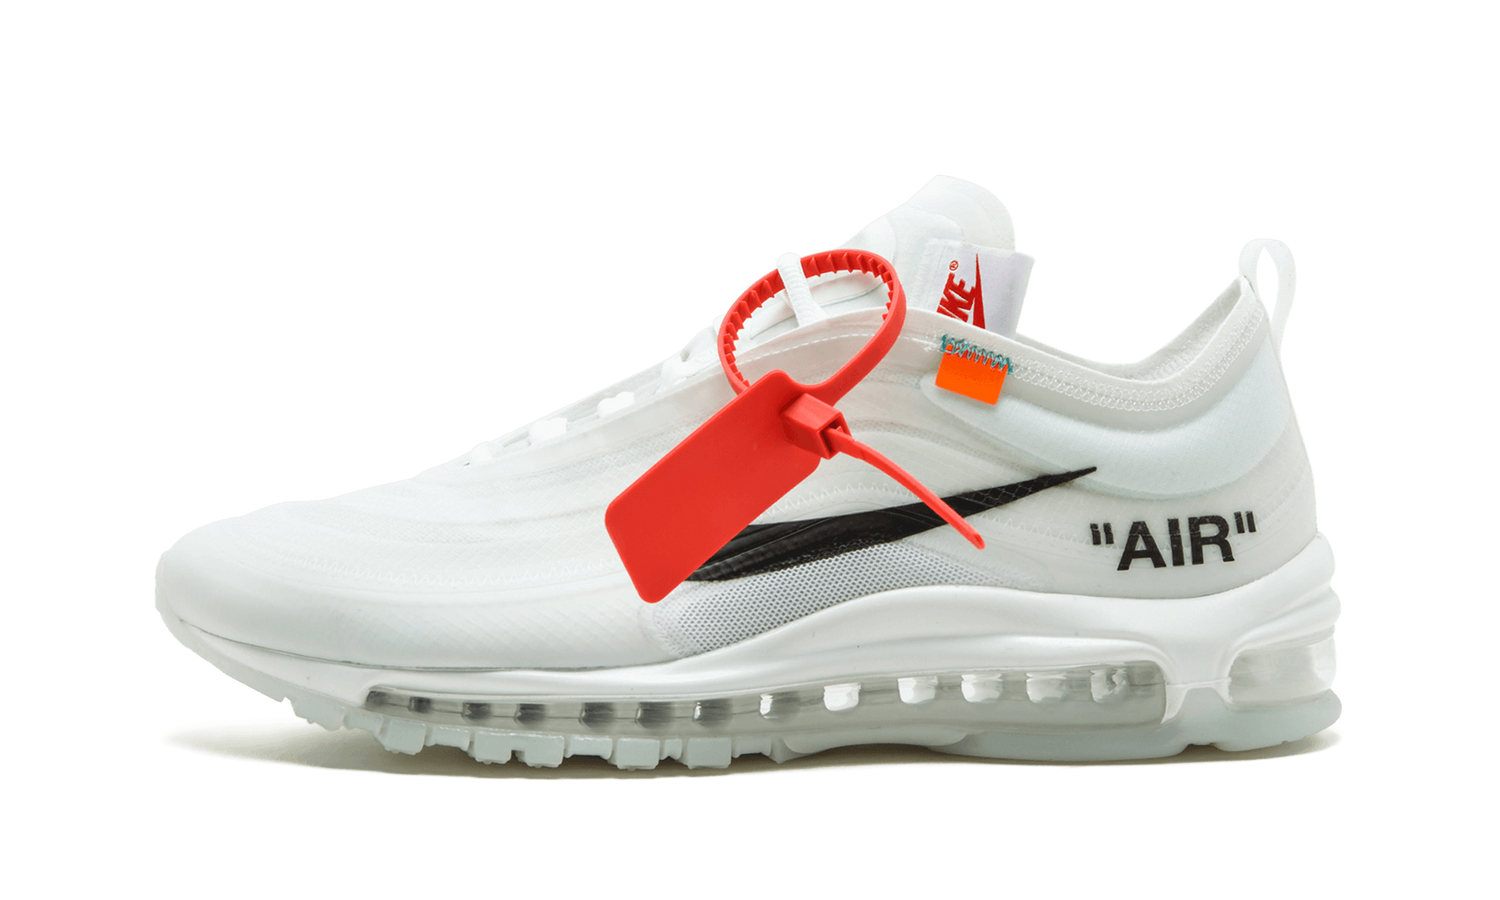 off white nike air max 97 release date